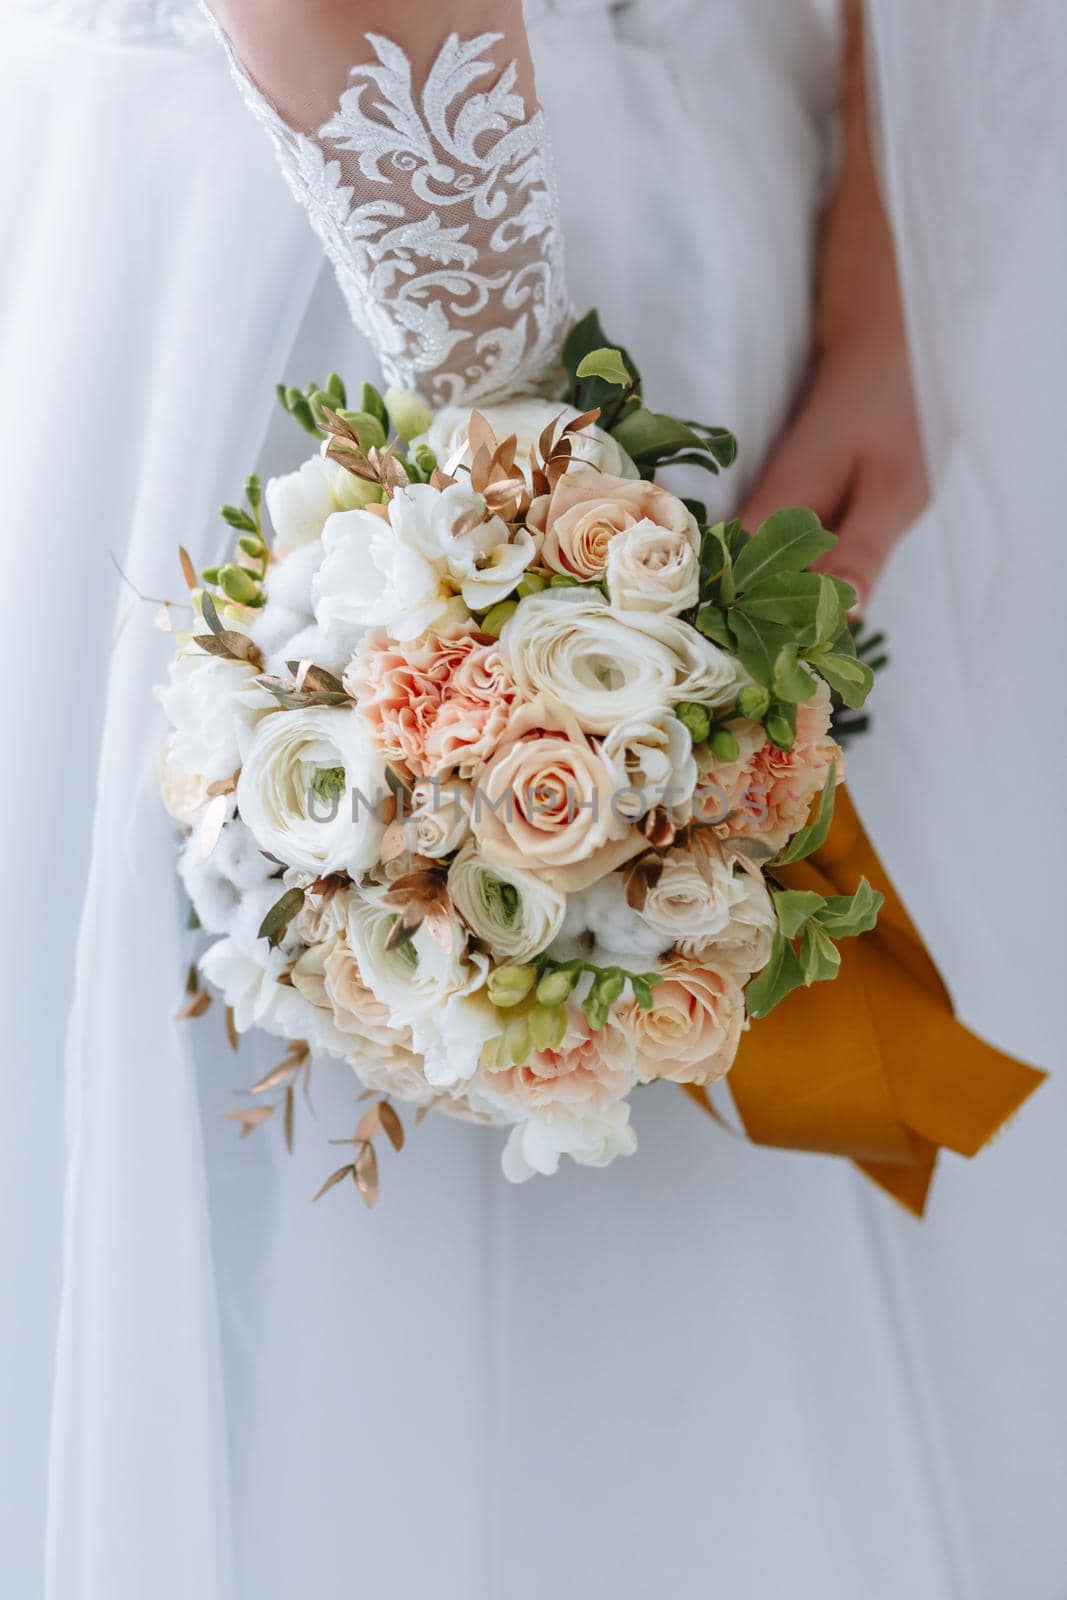 beautiful wedding bouquet in the hands of the bride